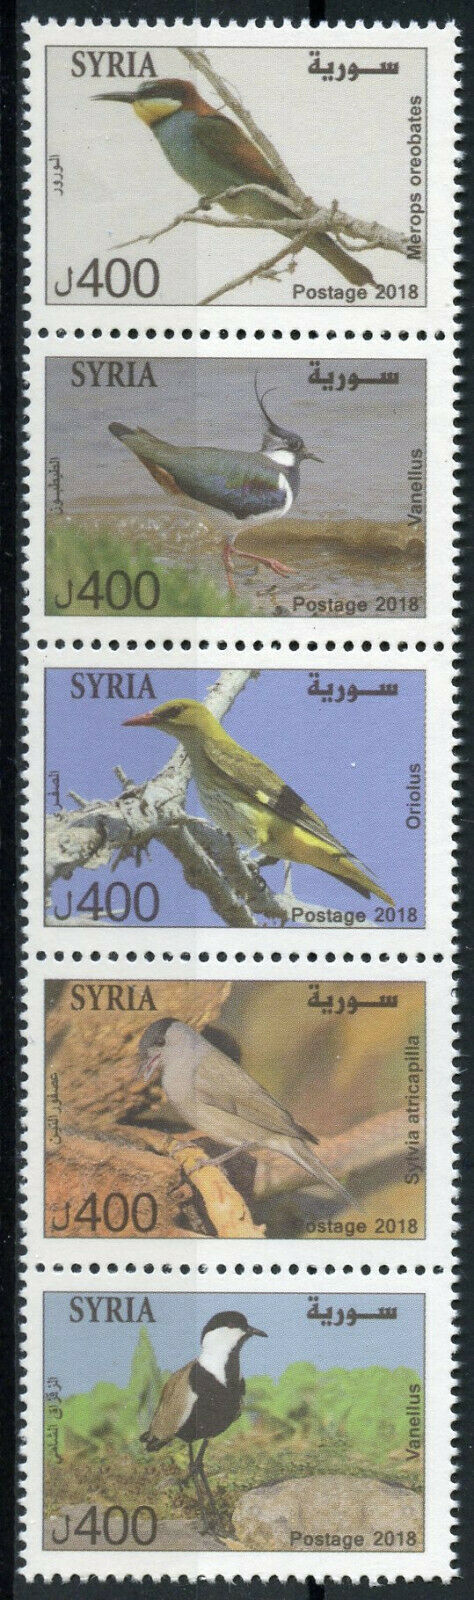 Syria 2018 MNH Birds Bee-Eaters Lapwings Orioles 5v Strip Bird Stamps